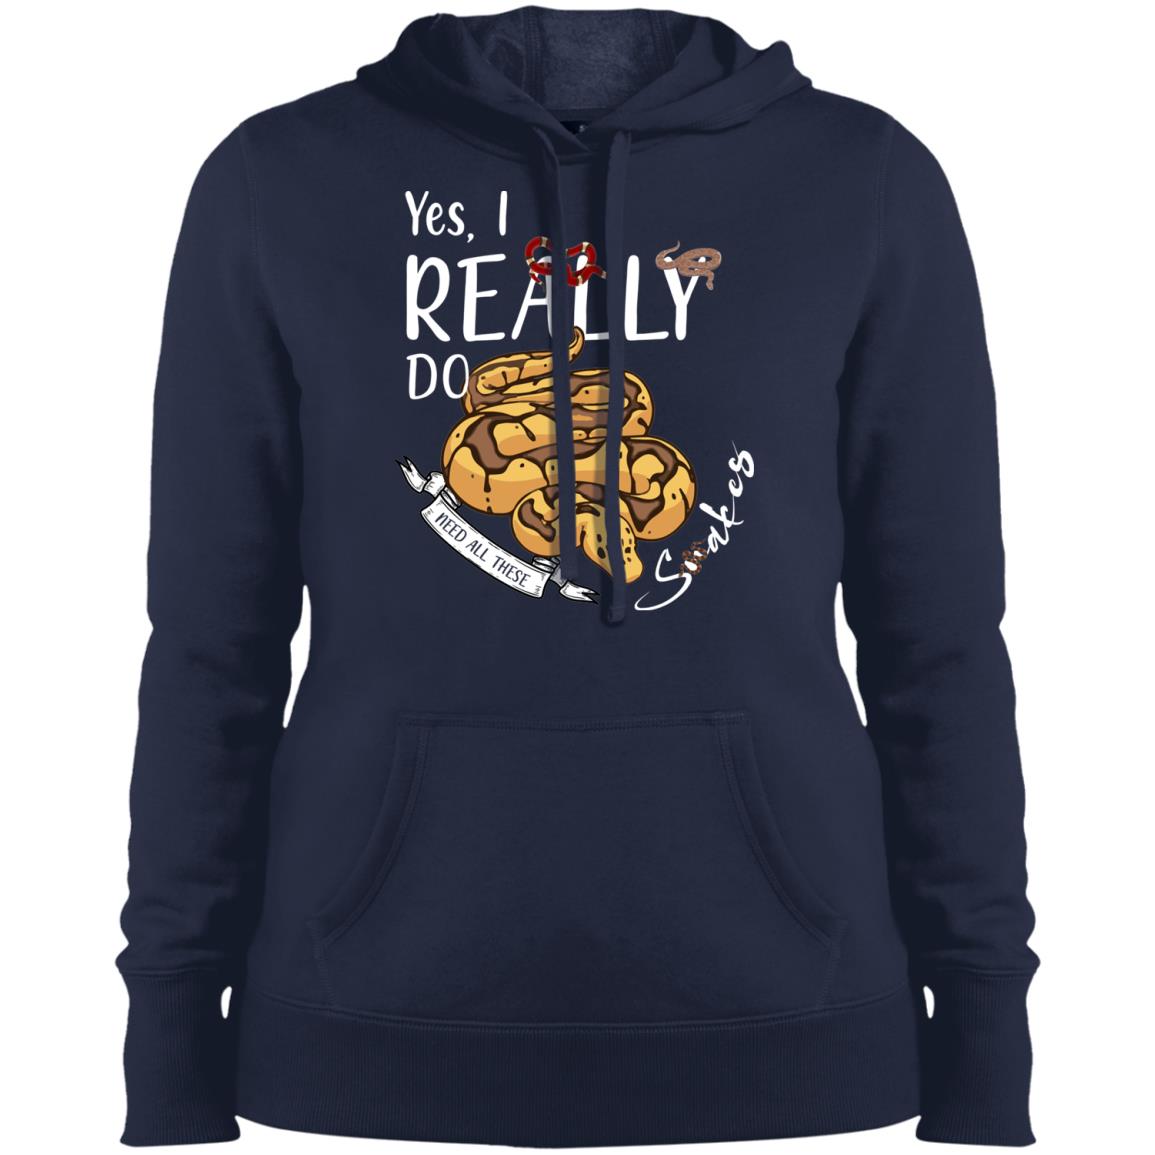 Yes, I Really Do Need All These Snakes - Womens Pullover Hooded Sweatshirt